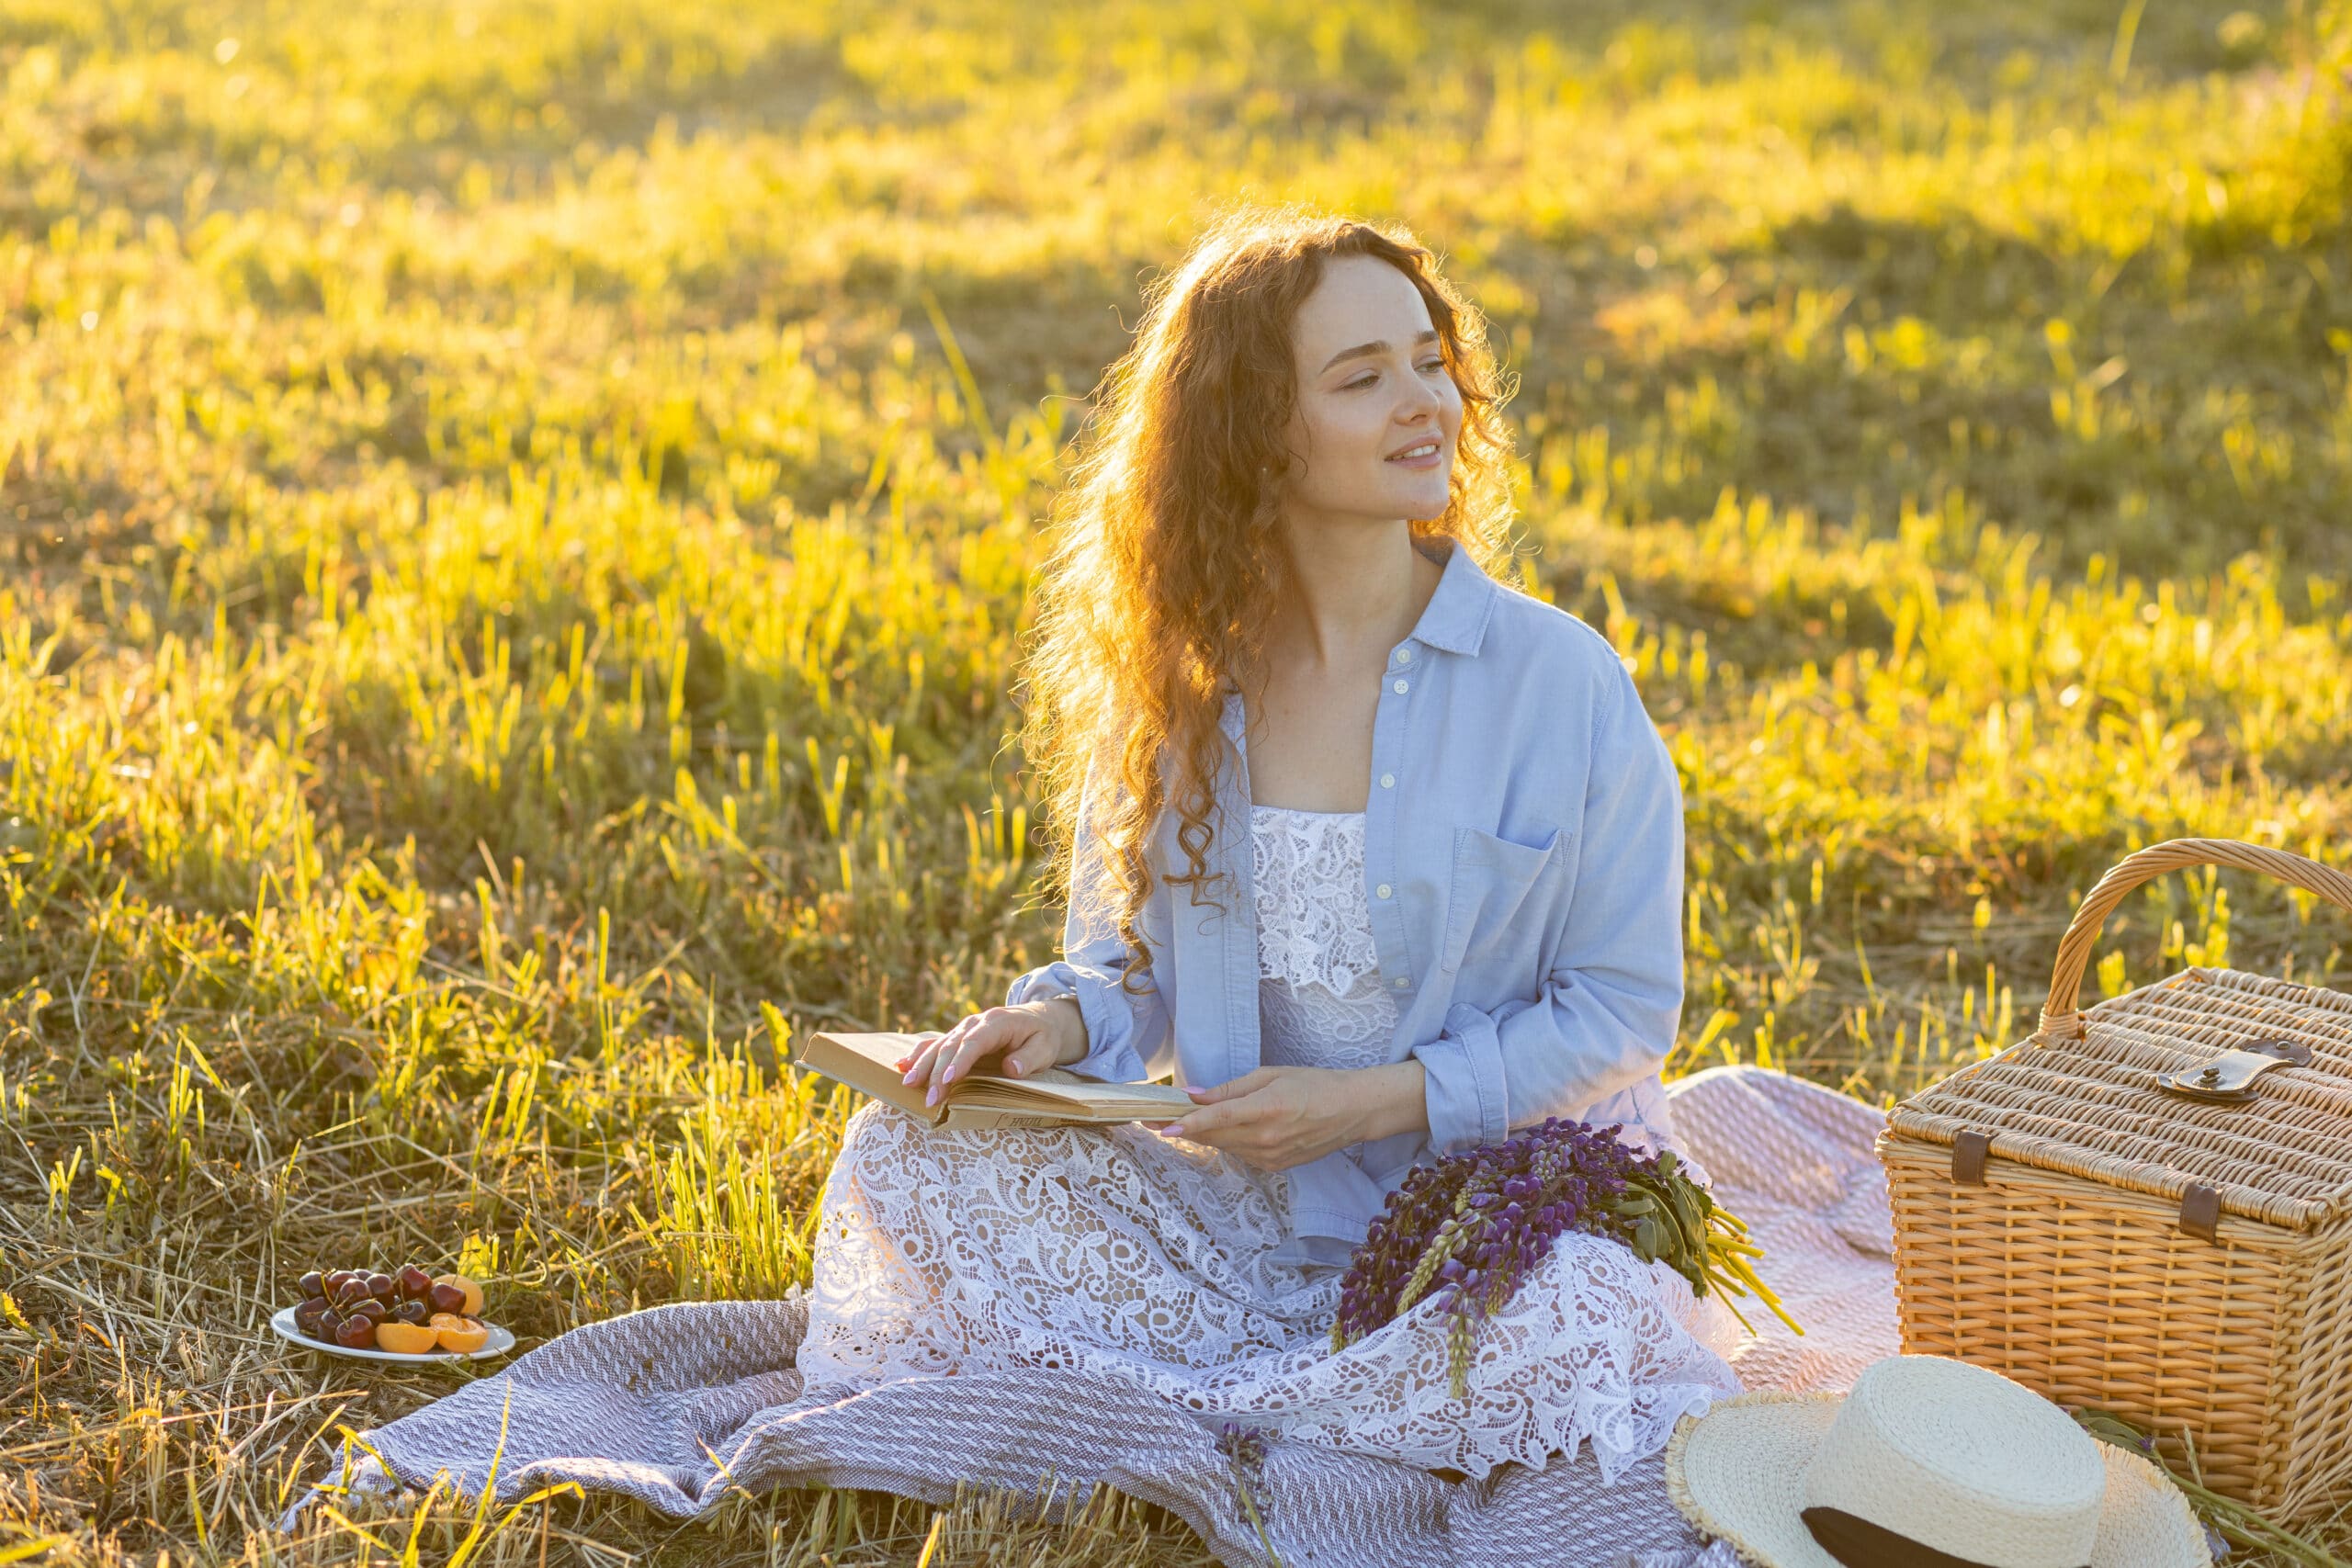 Beautiful young girl in a white dress, straw hat, picnic basket reading a book on a meadow.